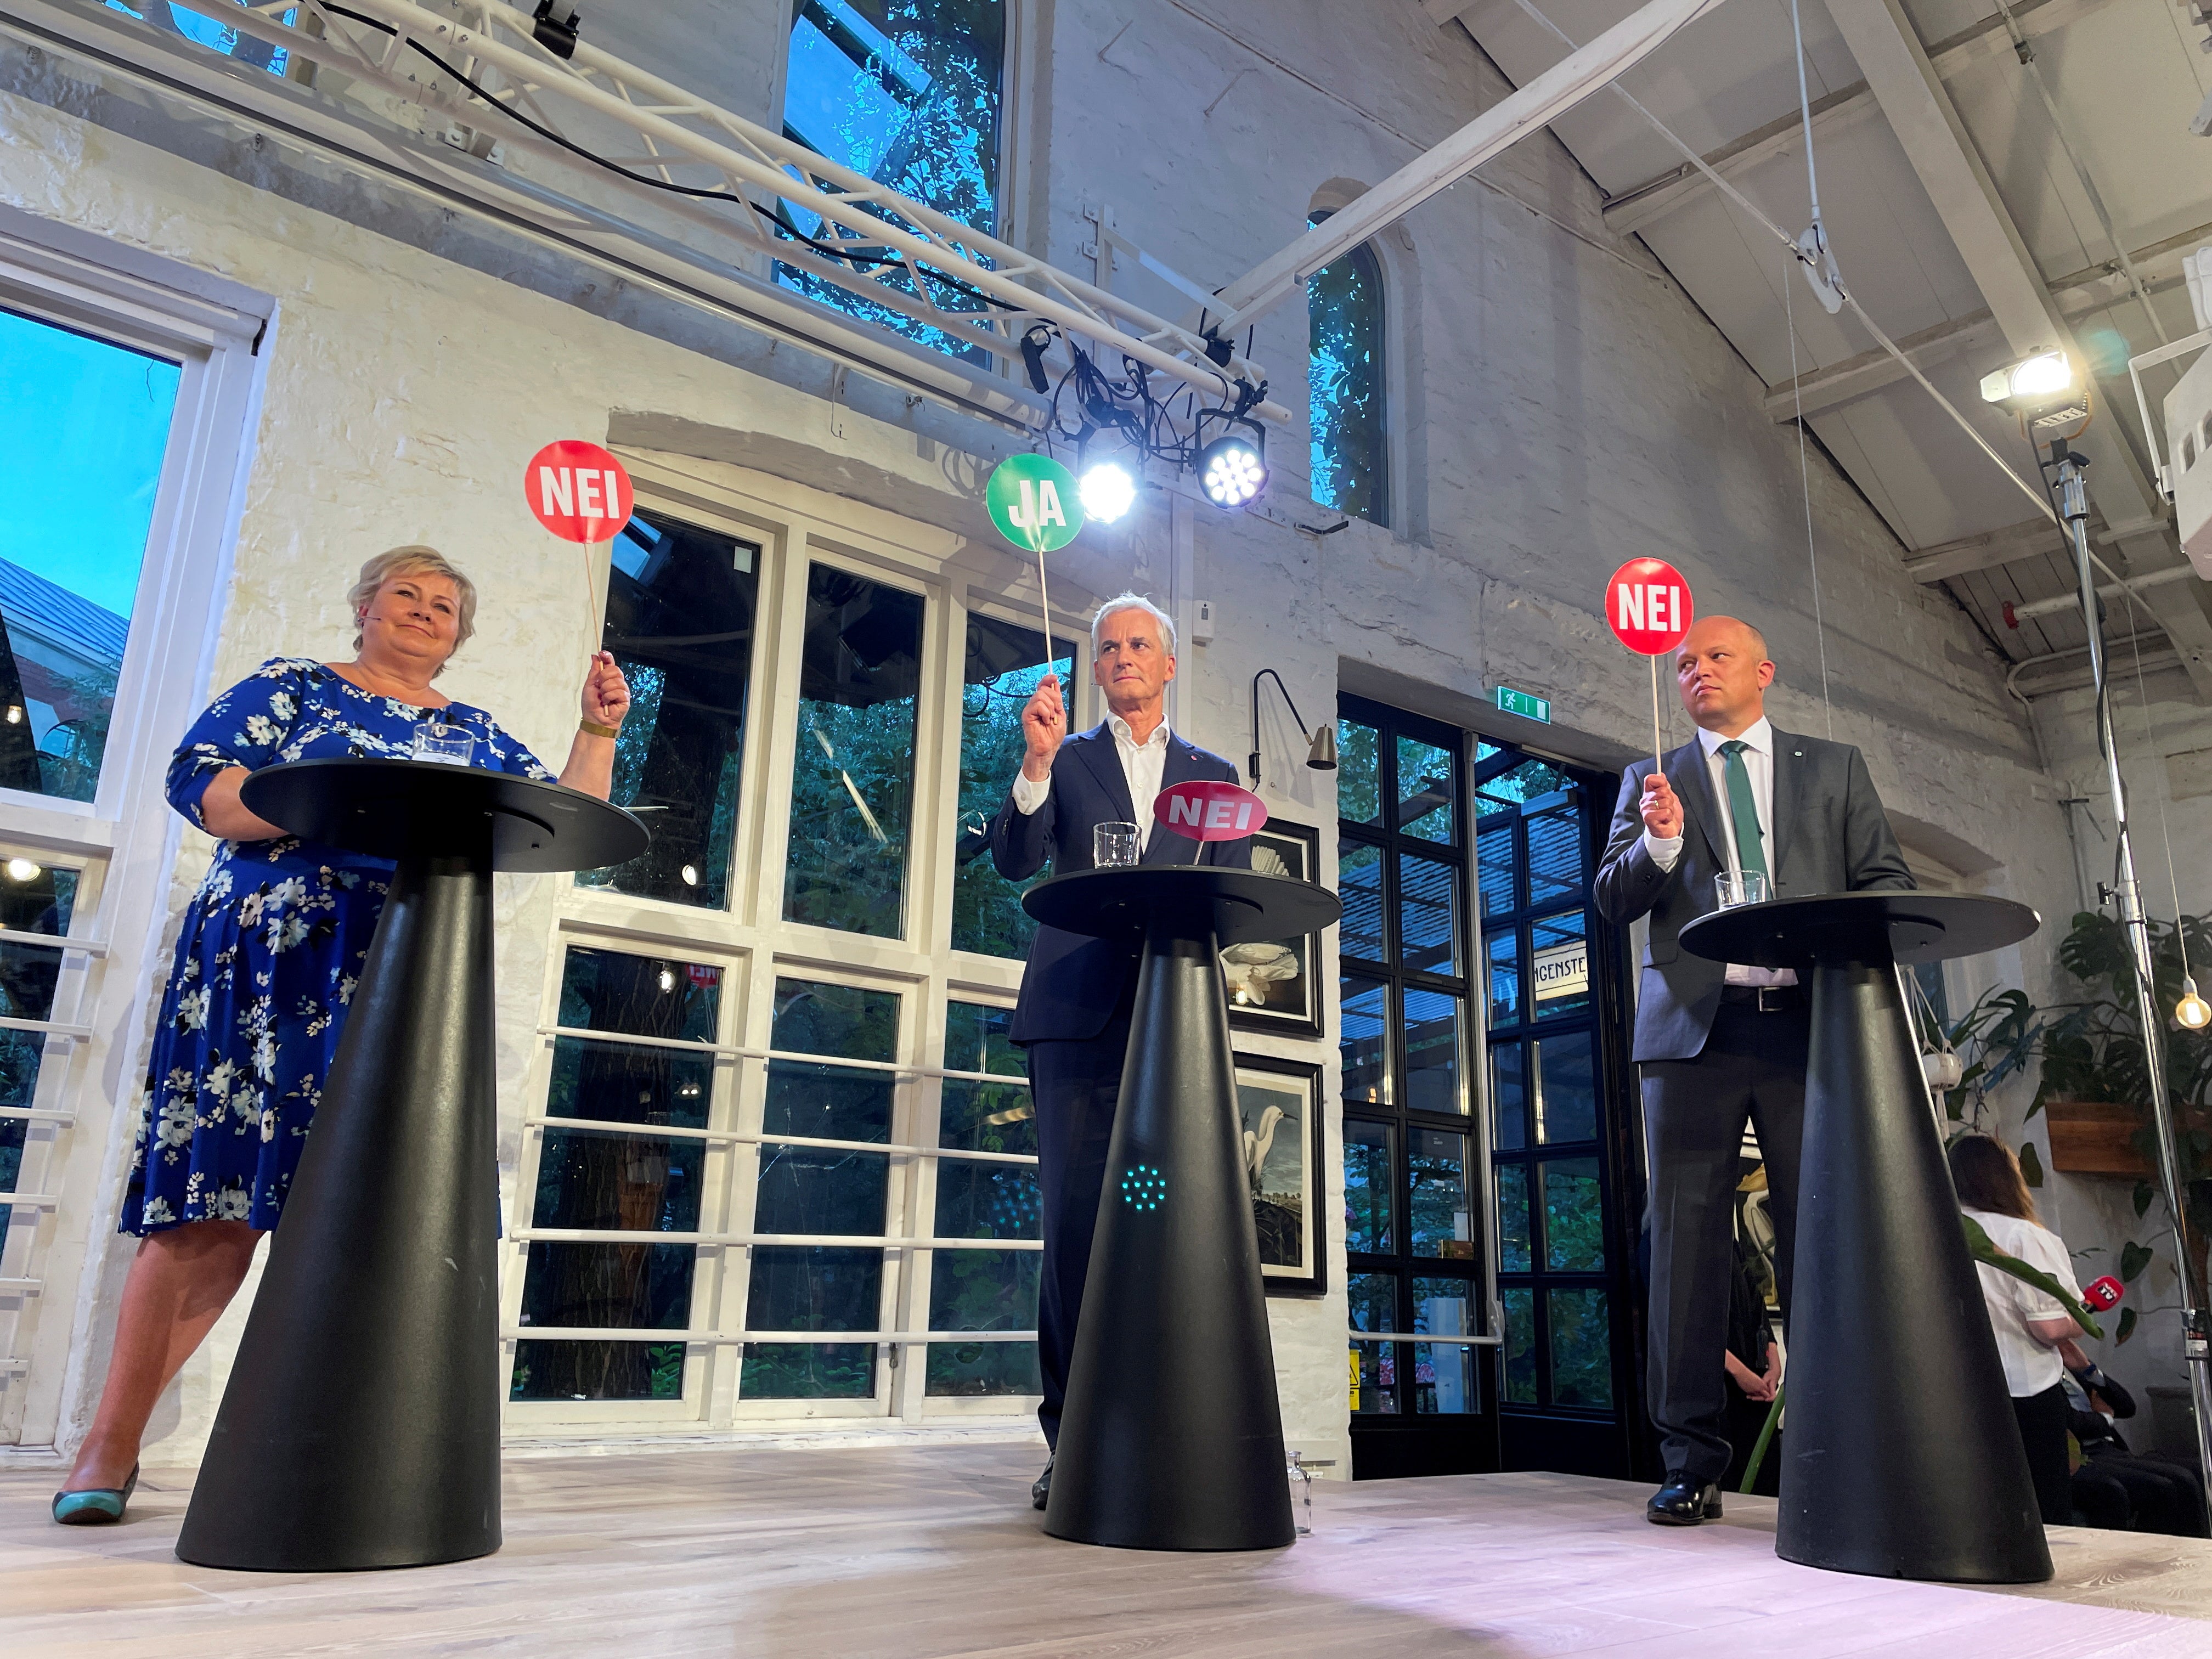 Prime ministerial candidates Erna Solberg from the Conservatives, Jonas Gahr Store from the Labour Party and Trygve Slagsvold Vedum from the Centre Party